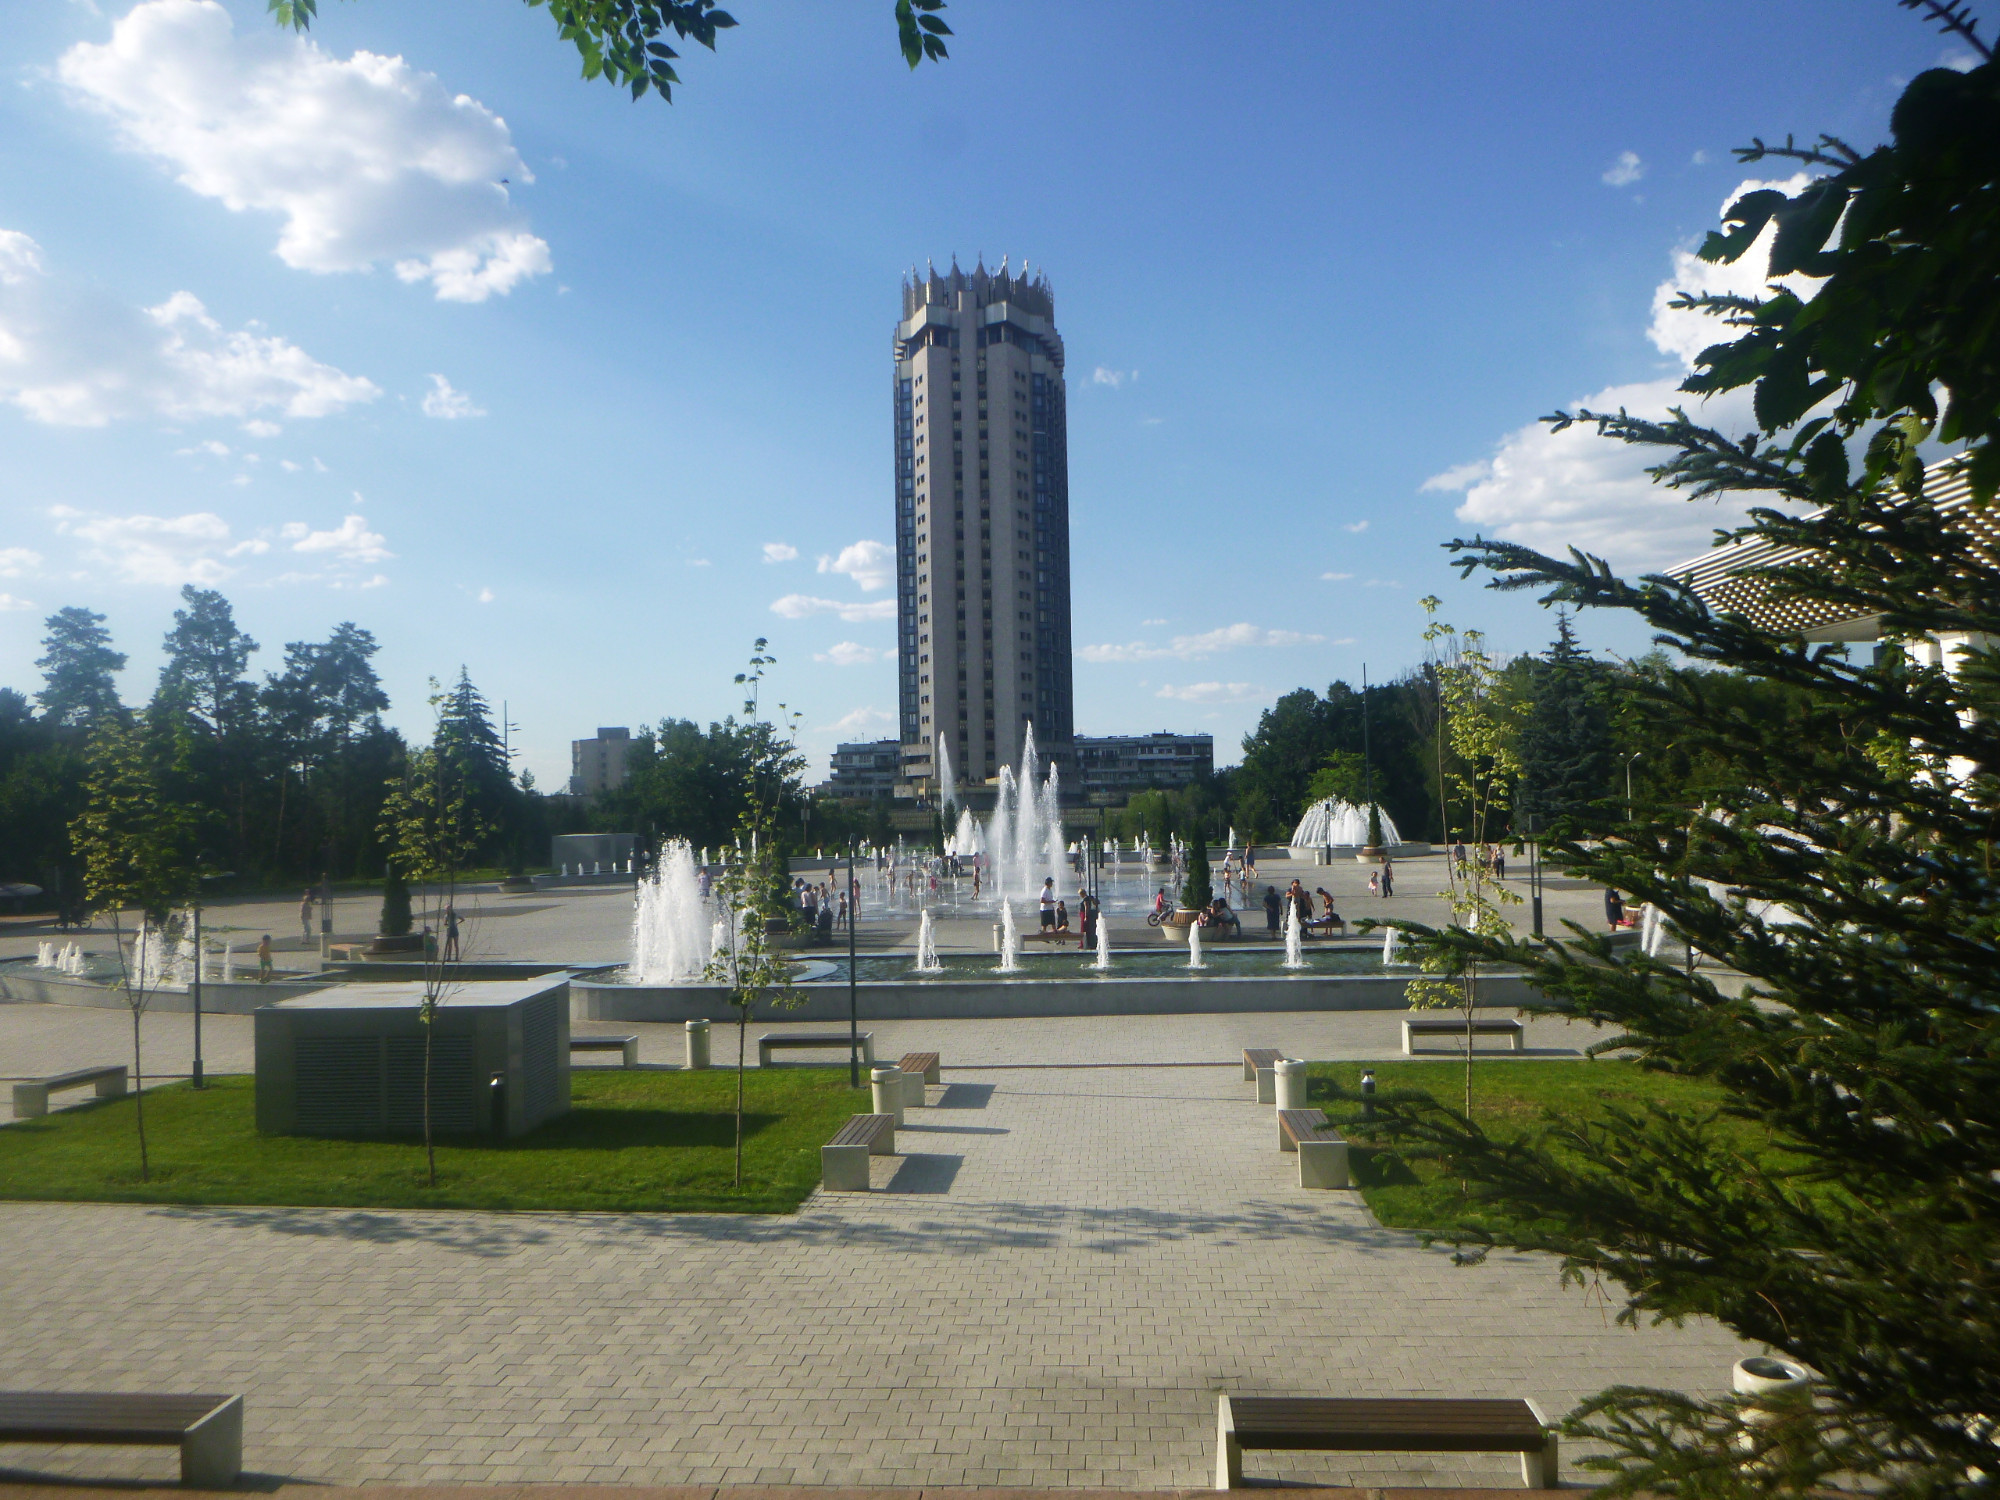 Square with fountains